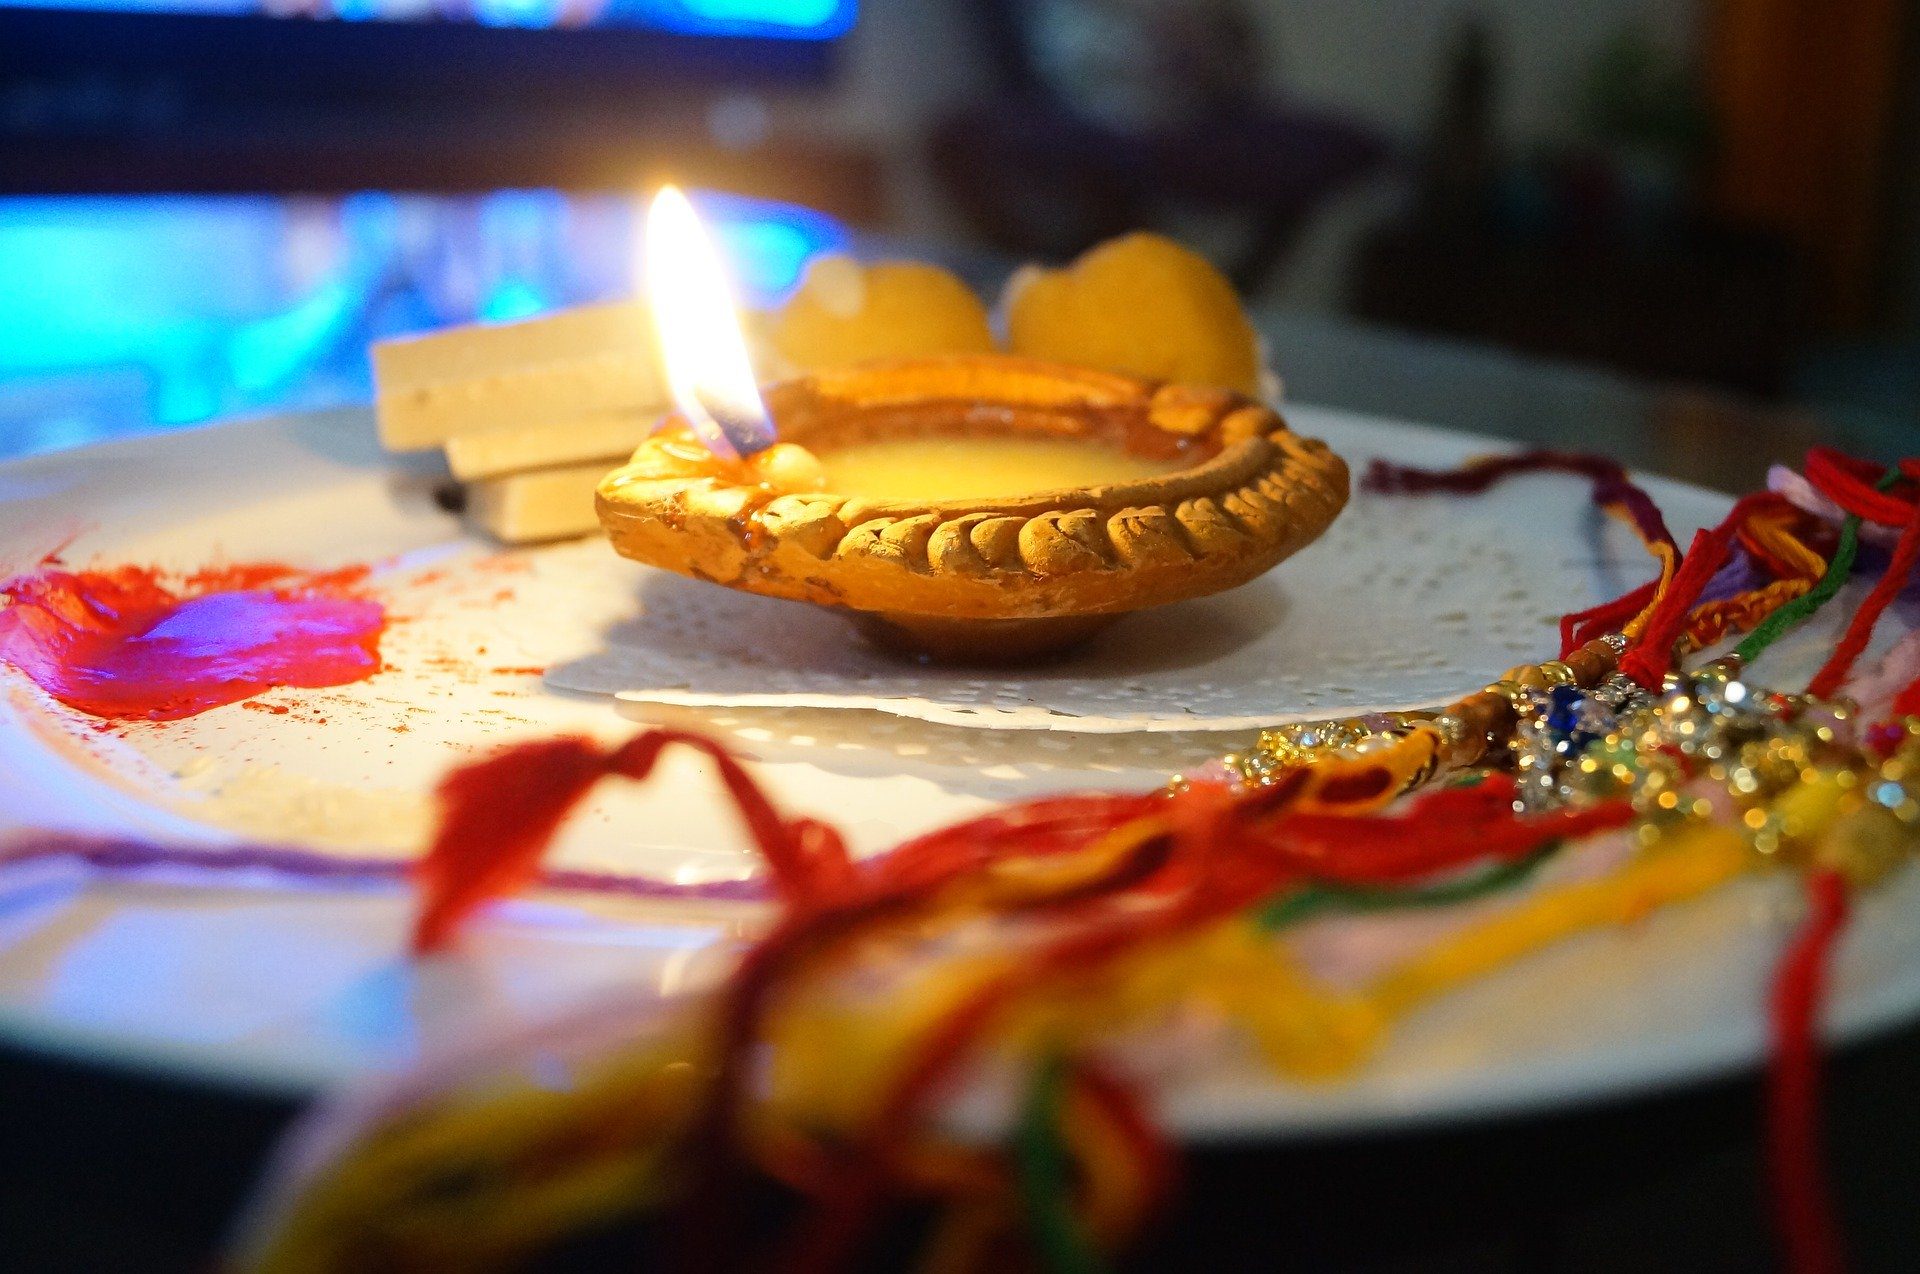 rakhi, an auspicious occasion is followed with pradeeps and sweets